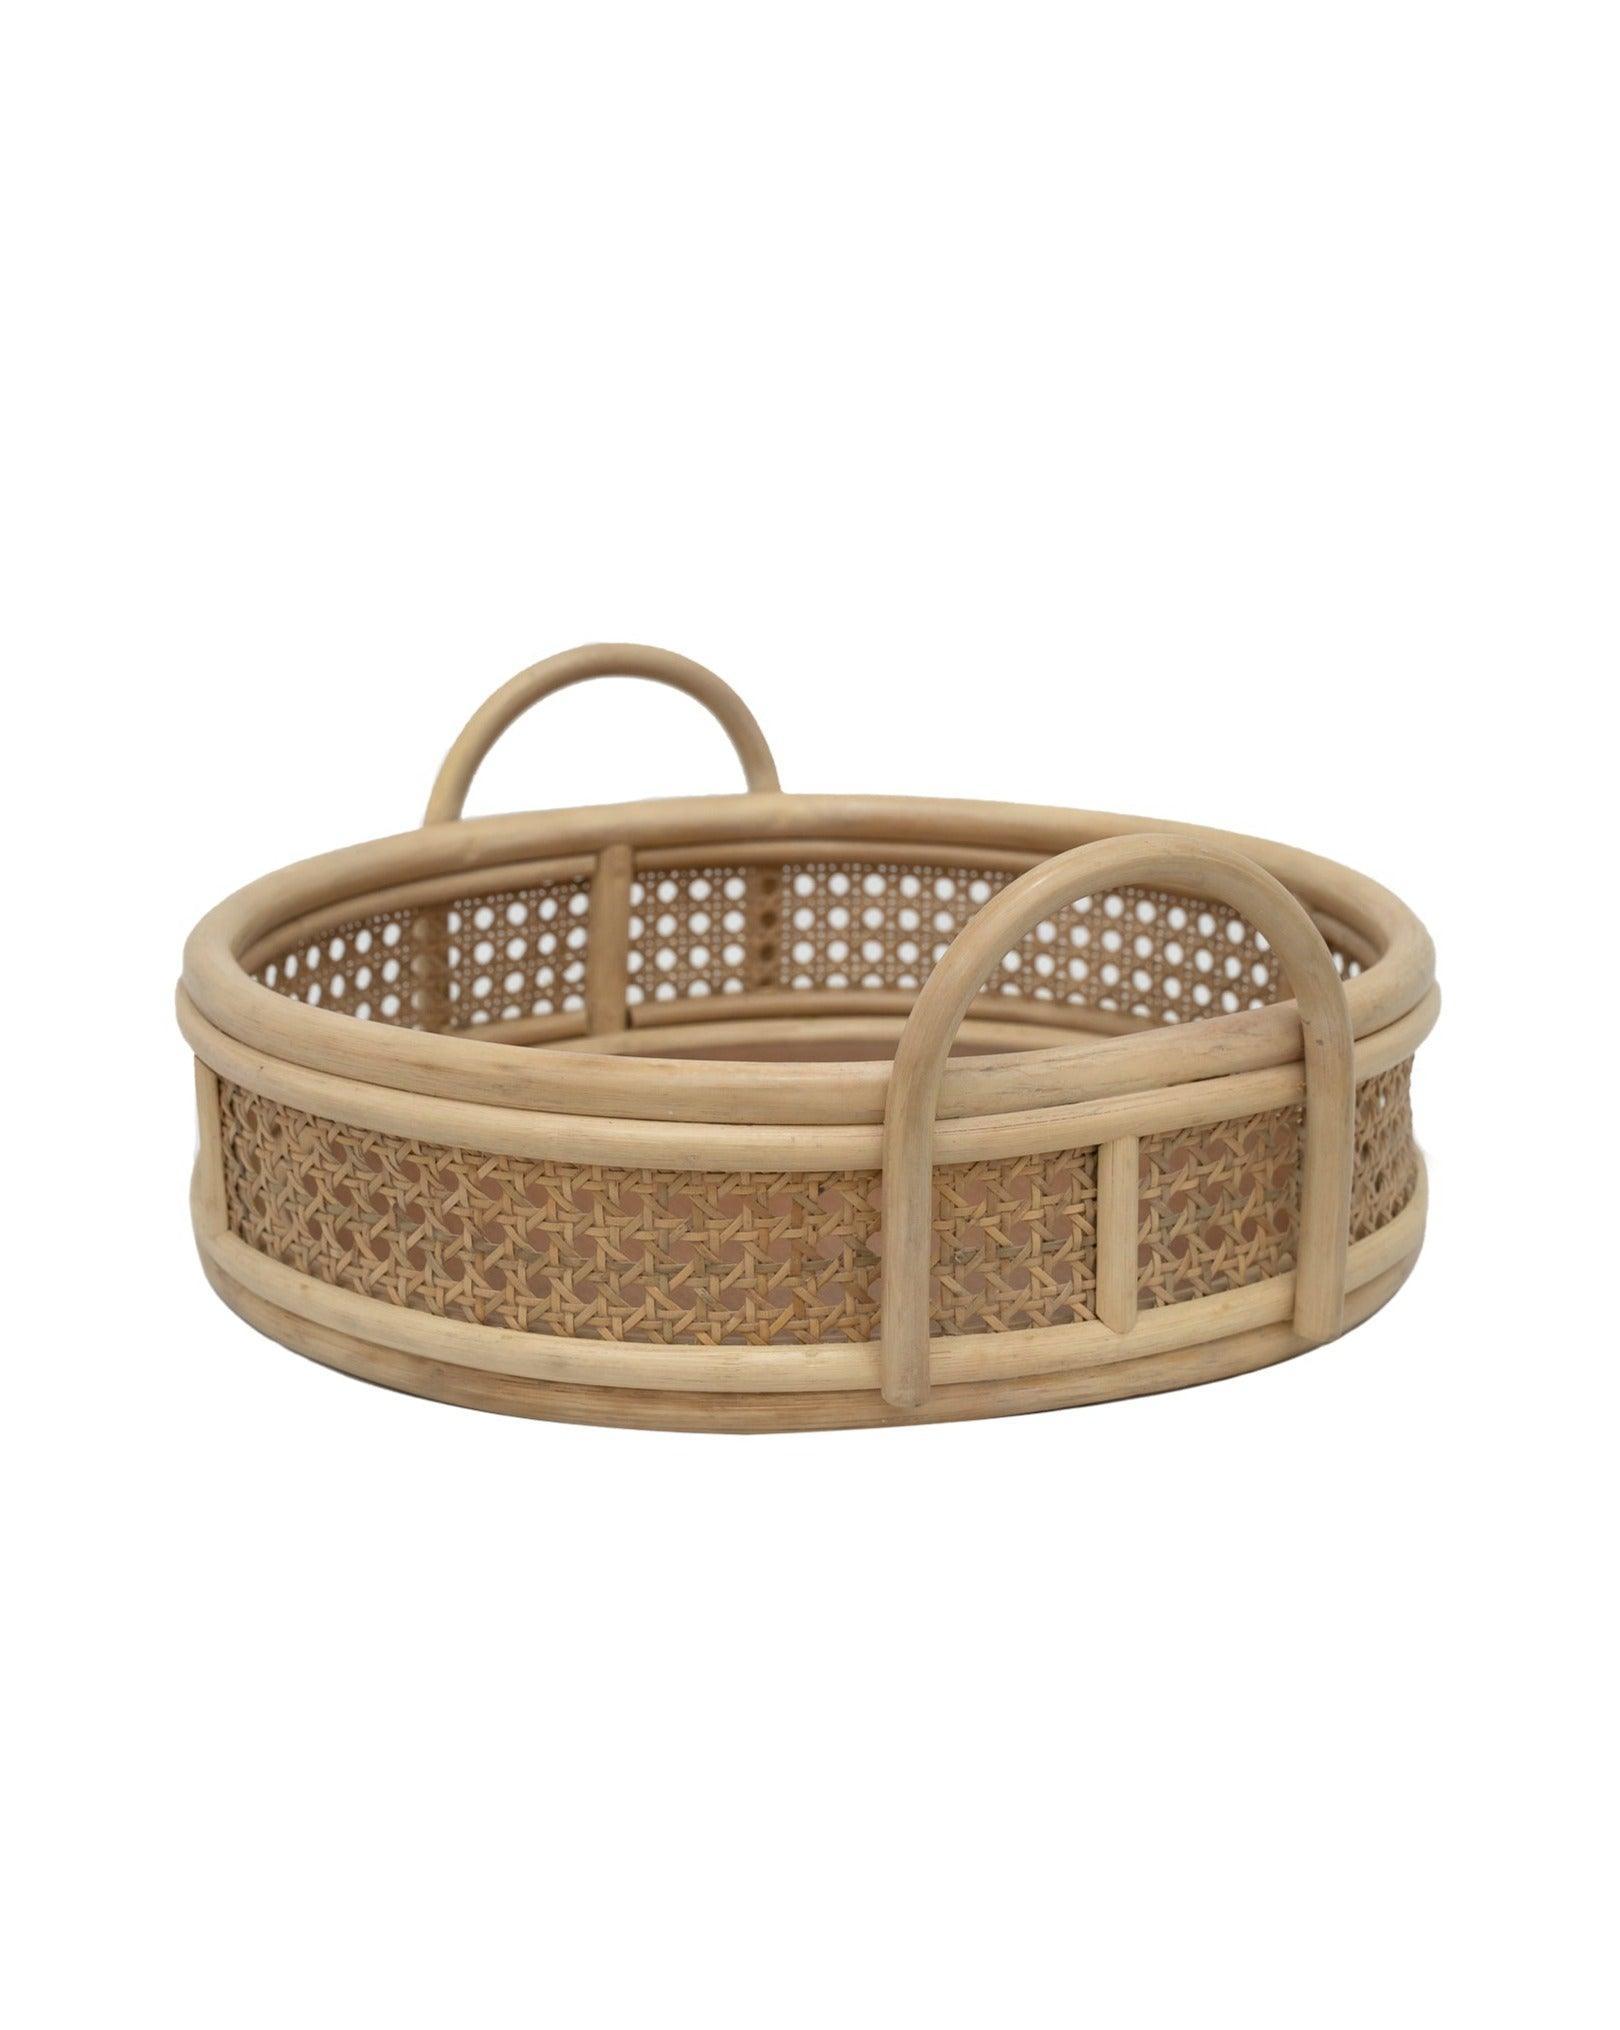 Rattan Full Size Serving Tray - Why and Whale